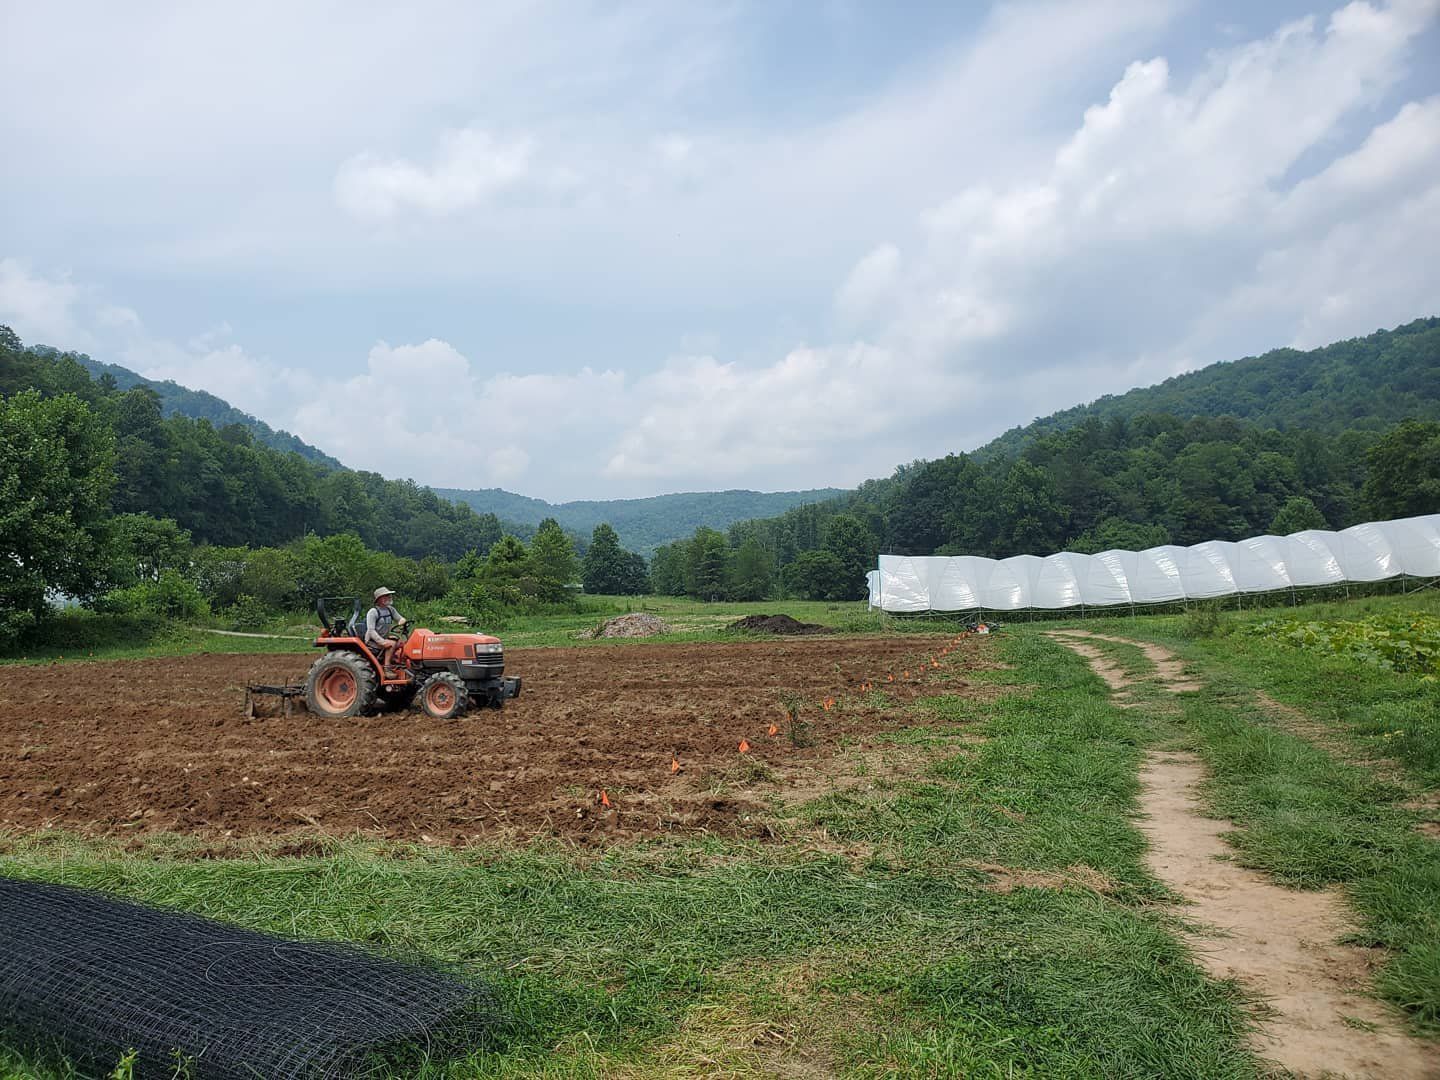 Previous Happening: Farm Happenings for July 27, 2021